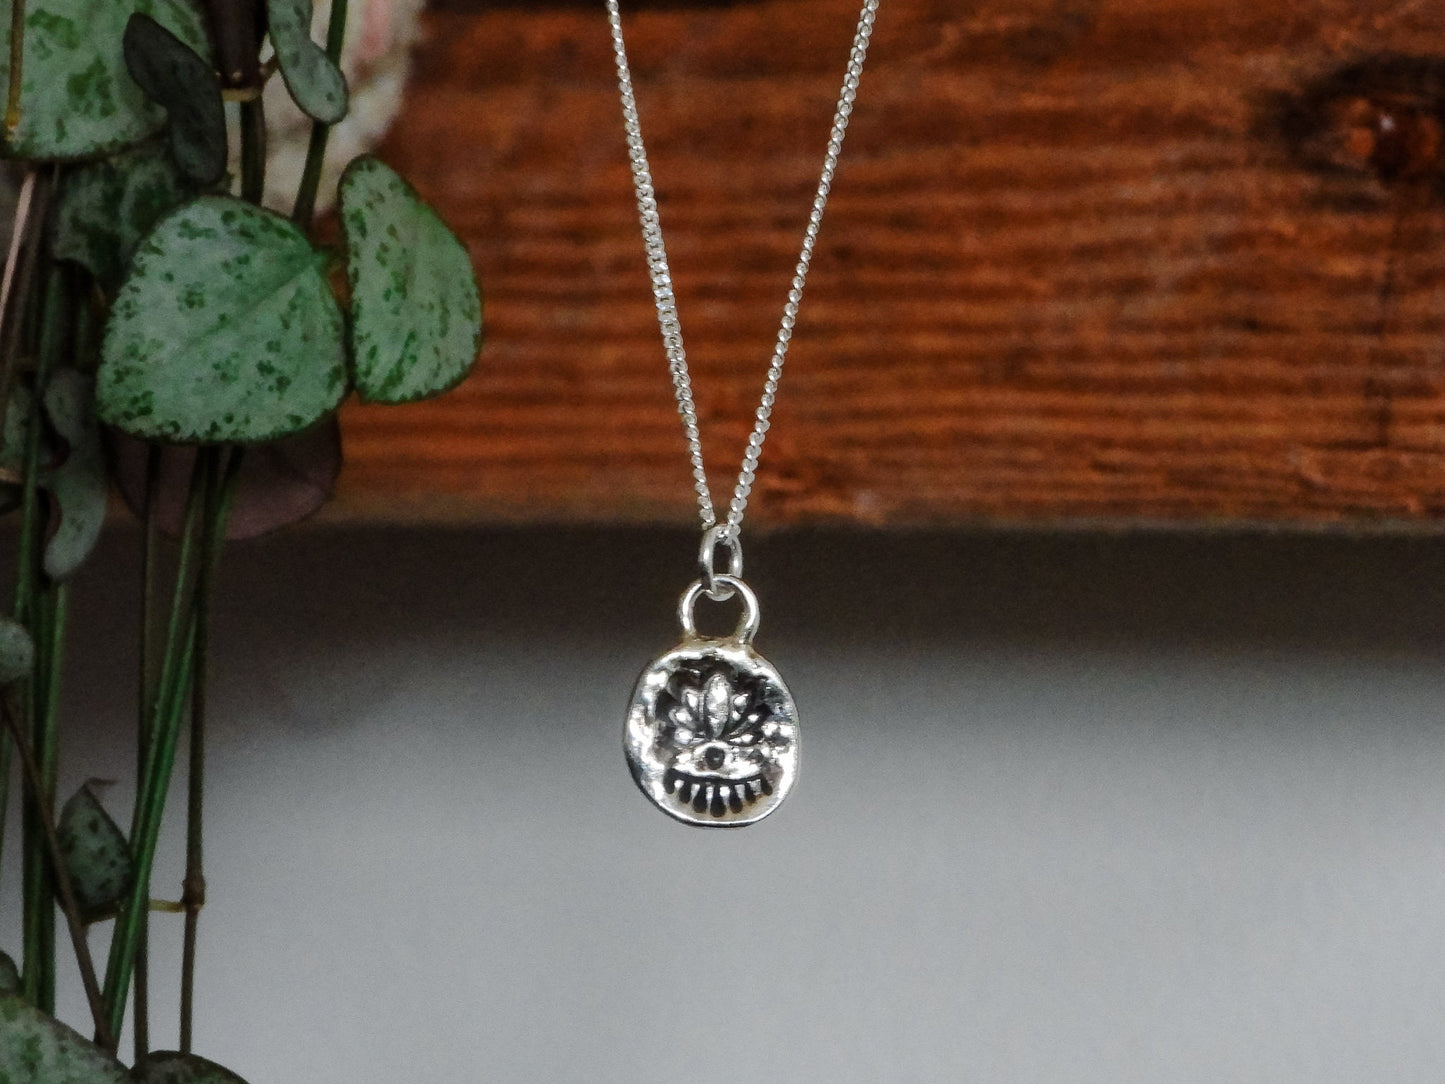 Rustic Lotus Flower Silver Coin Necklace | Self Growth